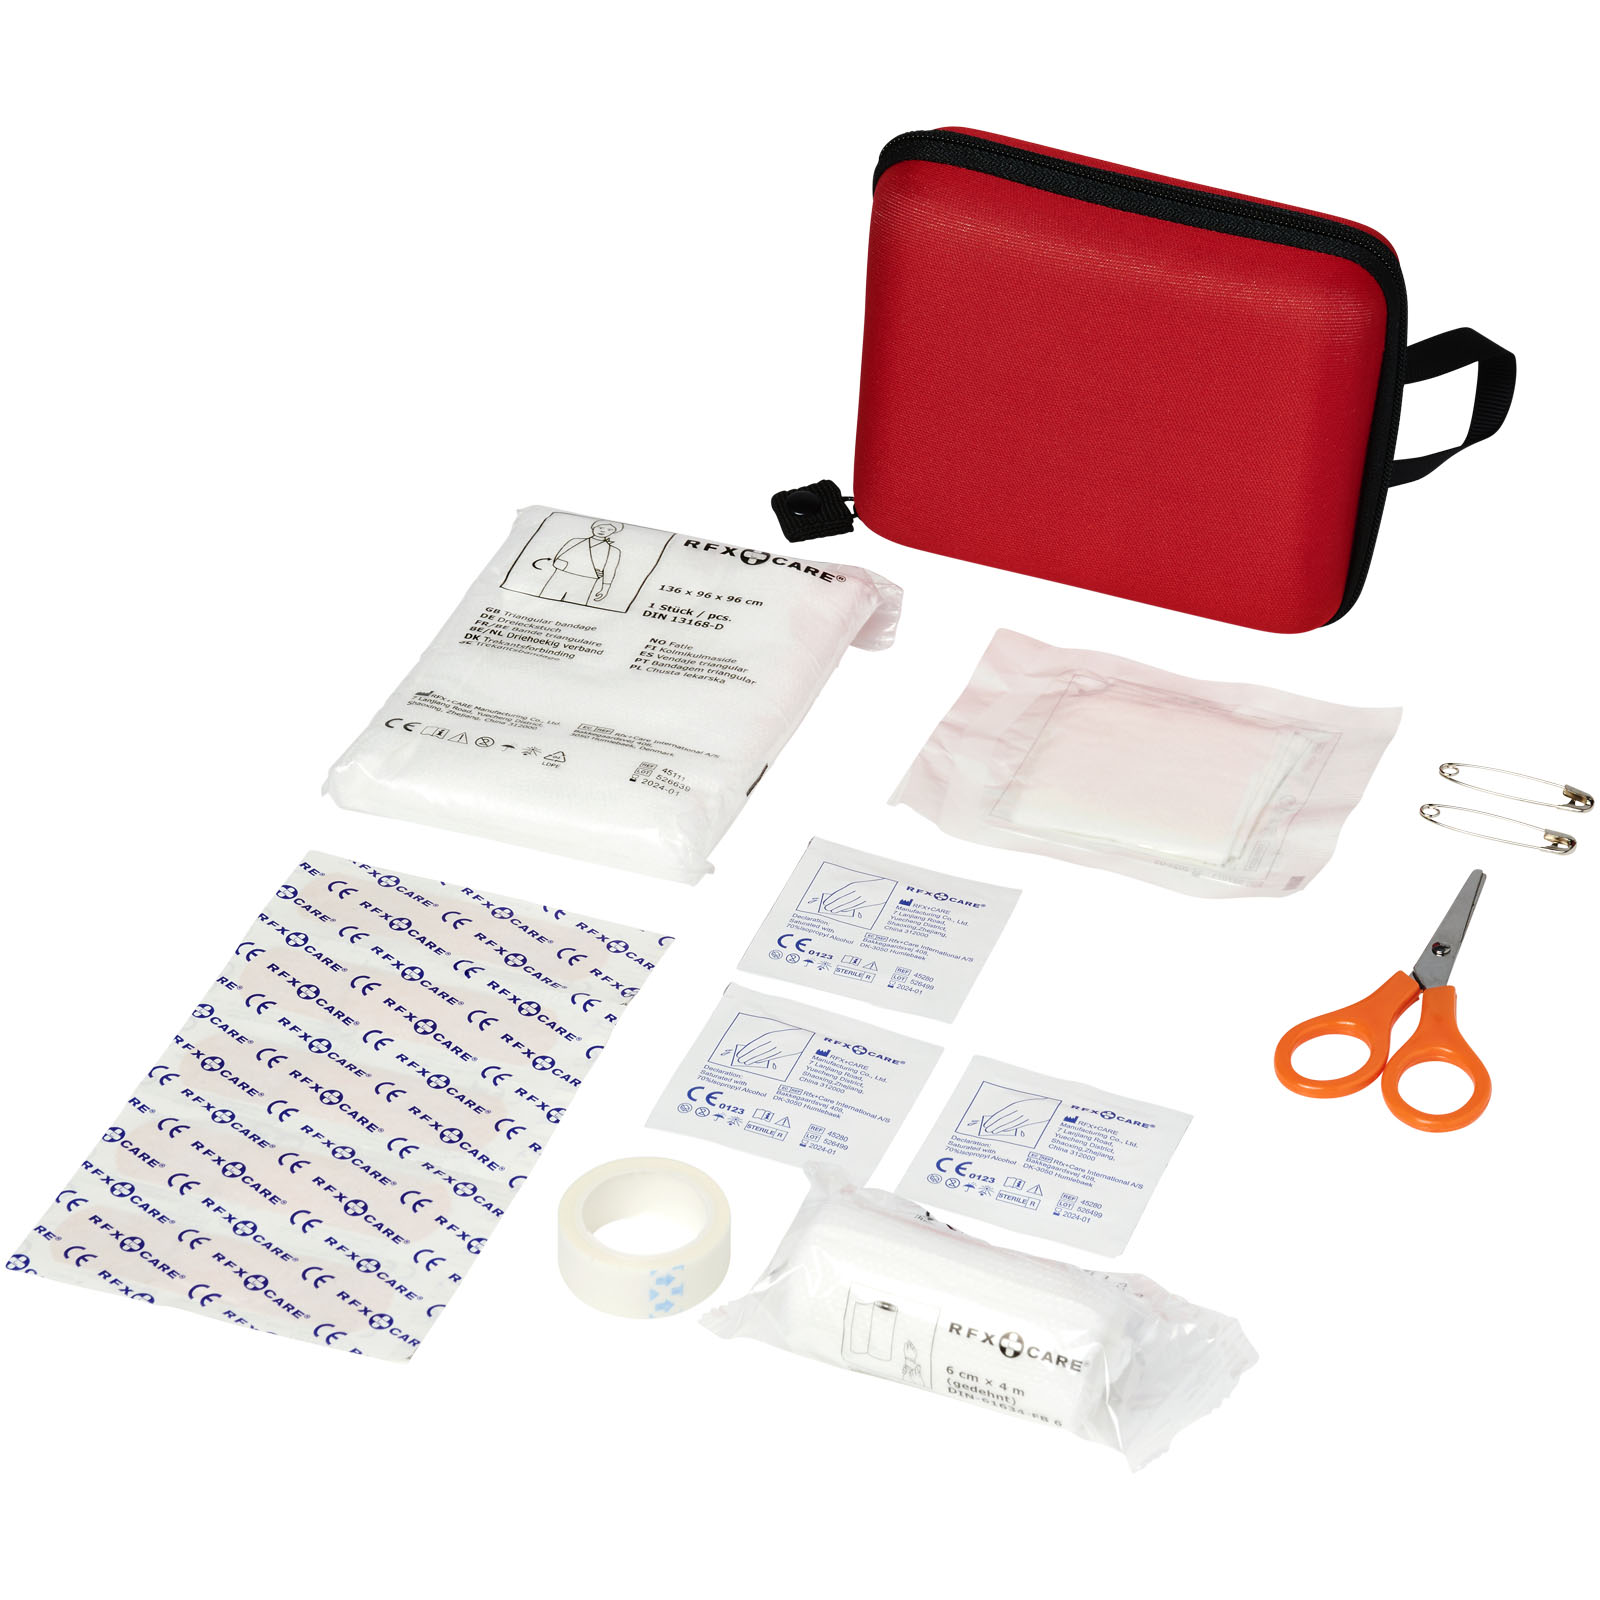 Health & Personal Care - Healer 16-piece first aid kit